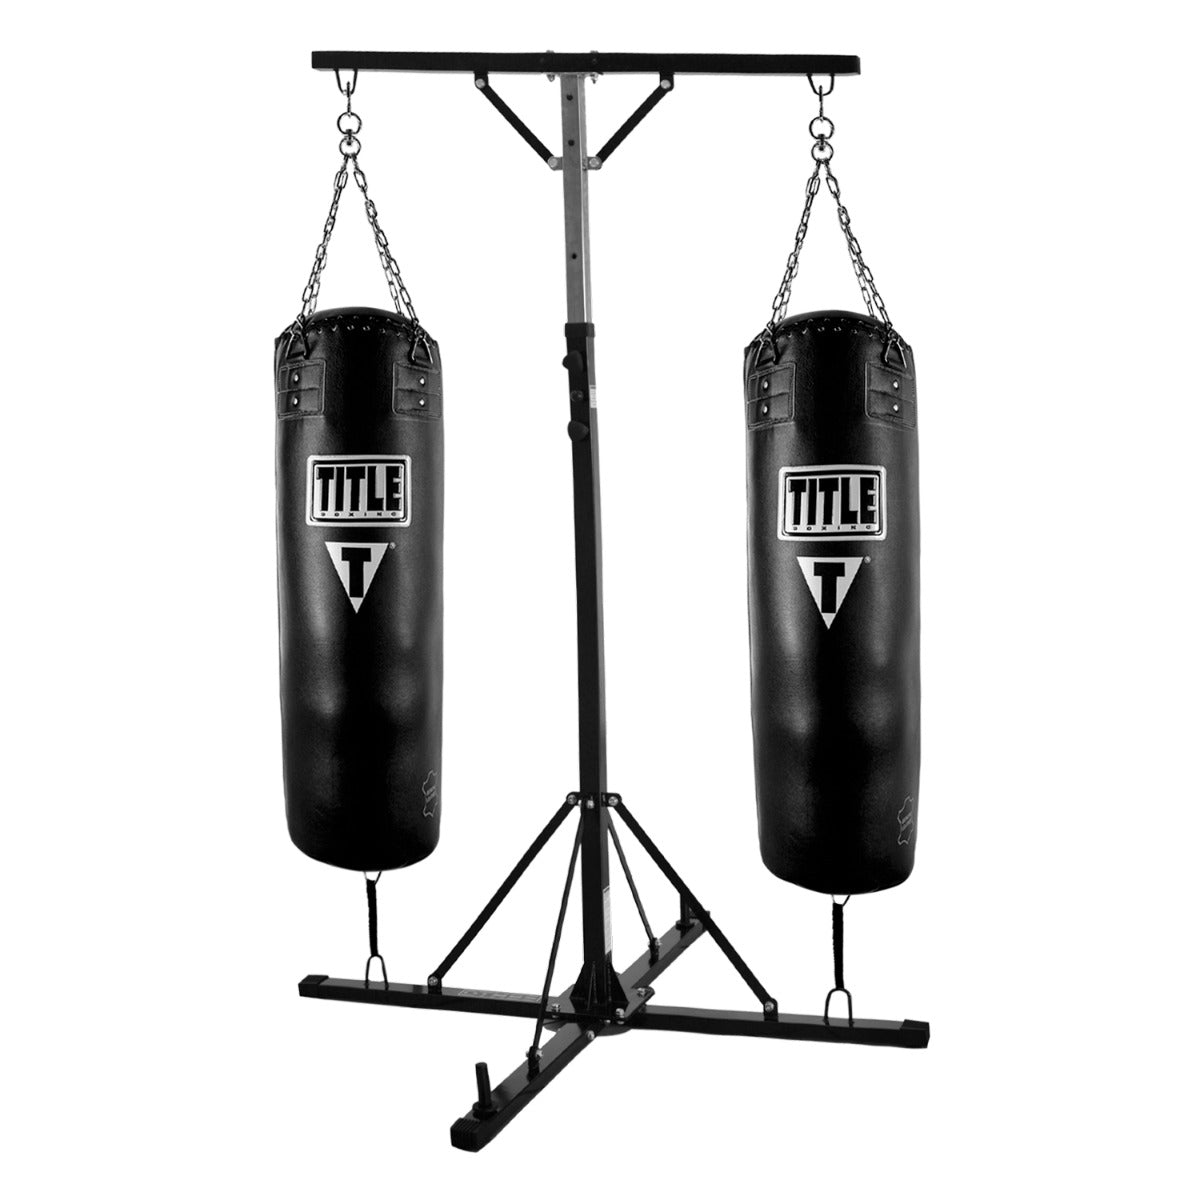 Details 73+ title boxing bags - in.duhocakina